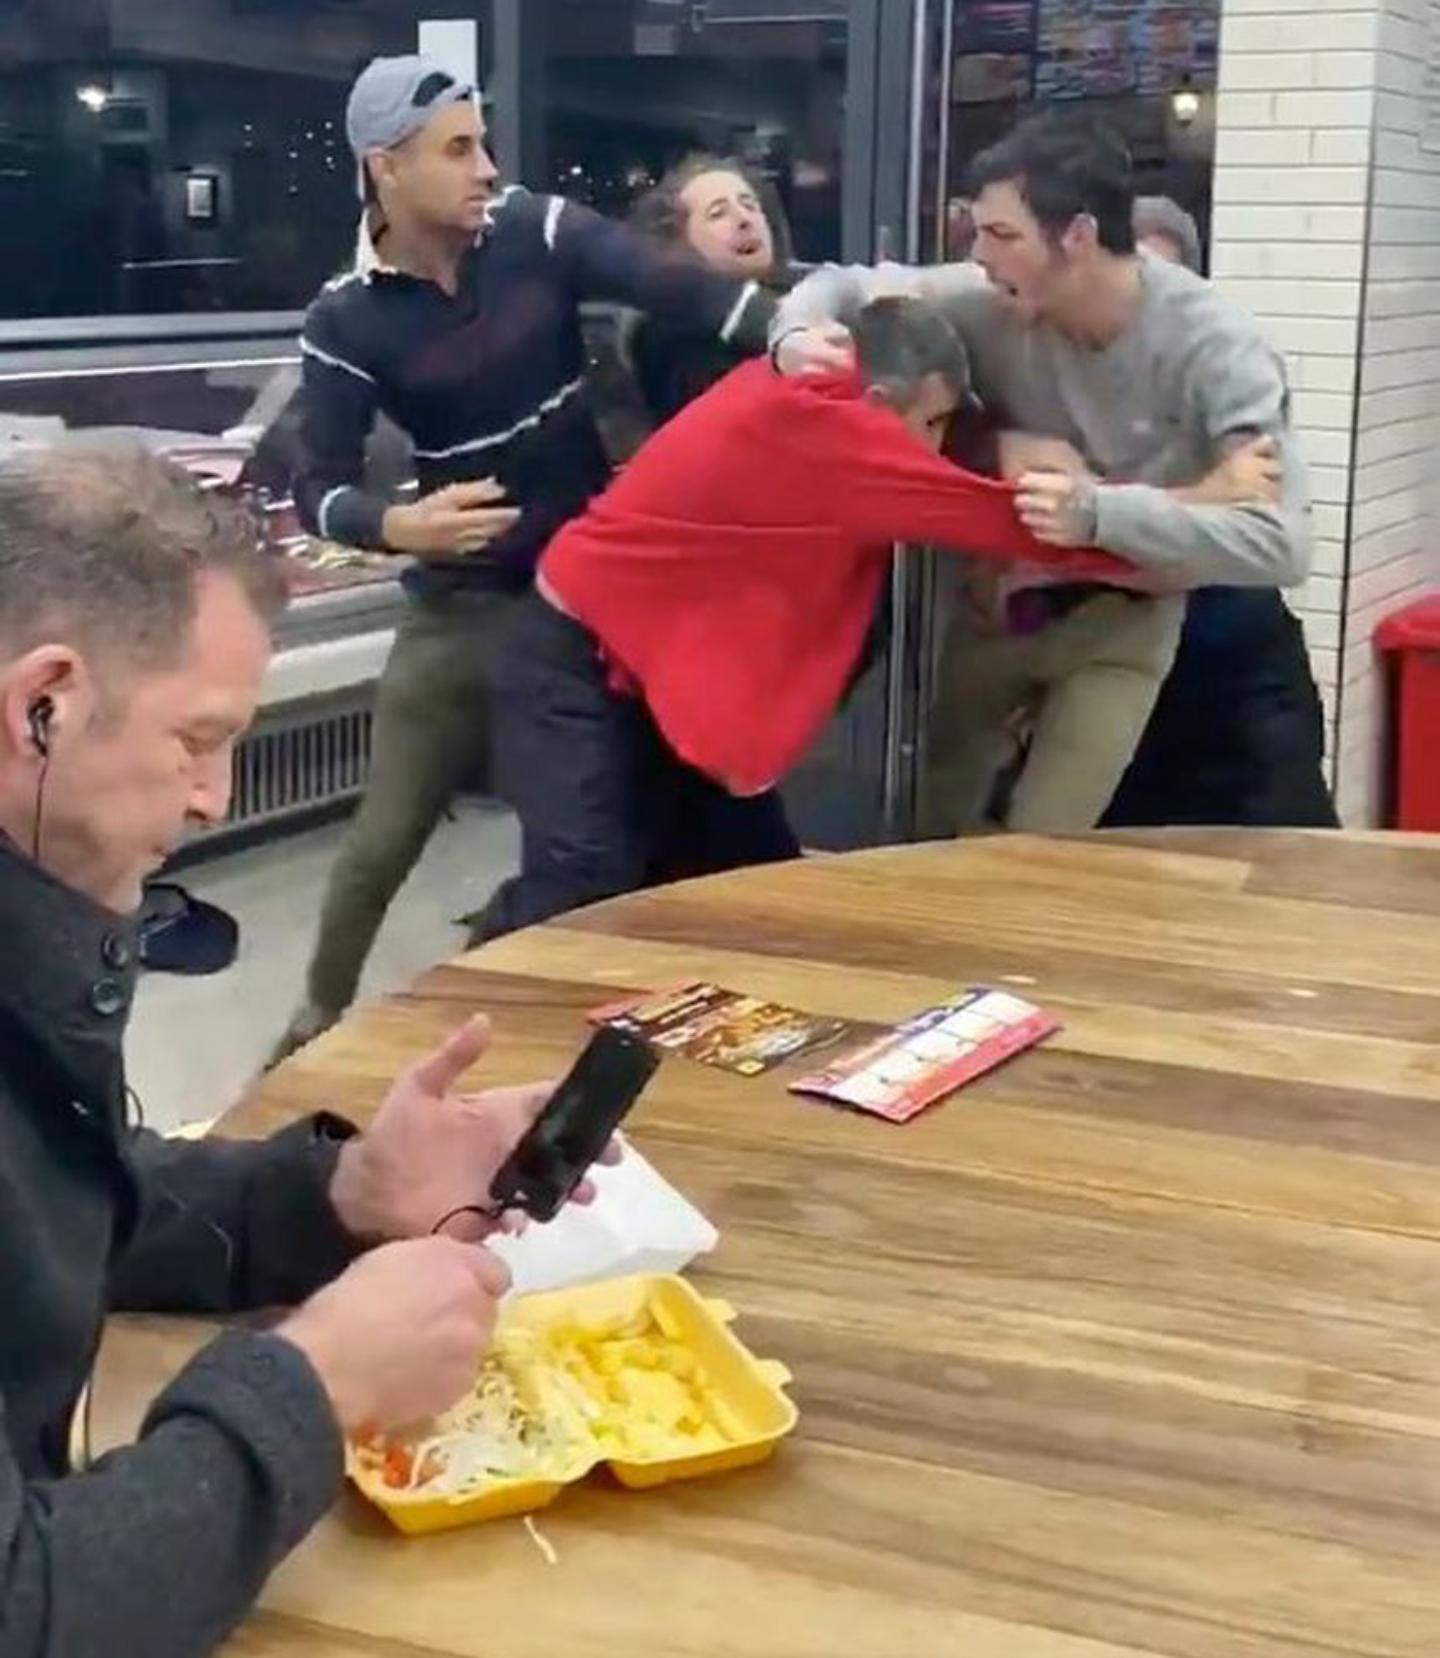 Dude casually eating next to a group fight Blank Meme Template